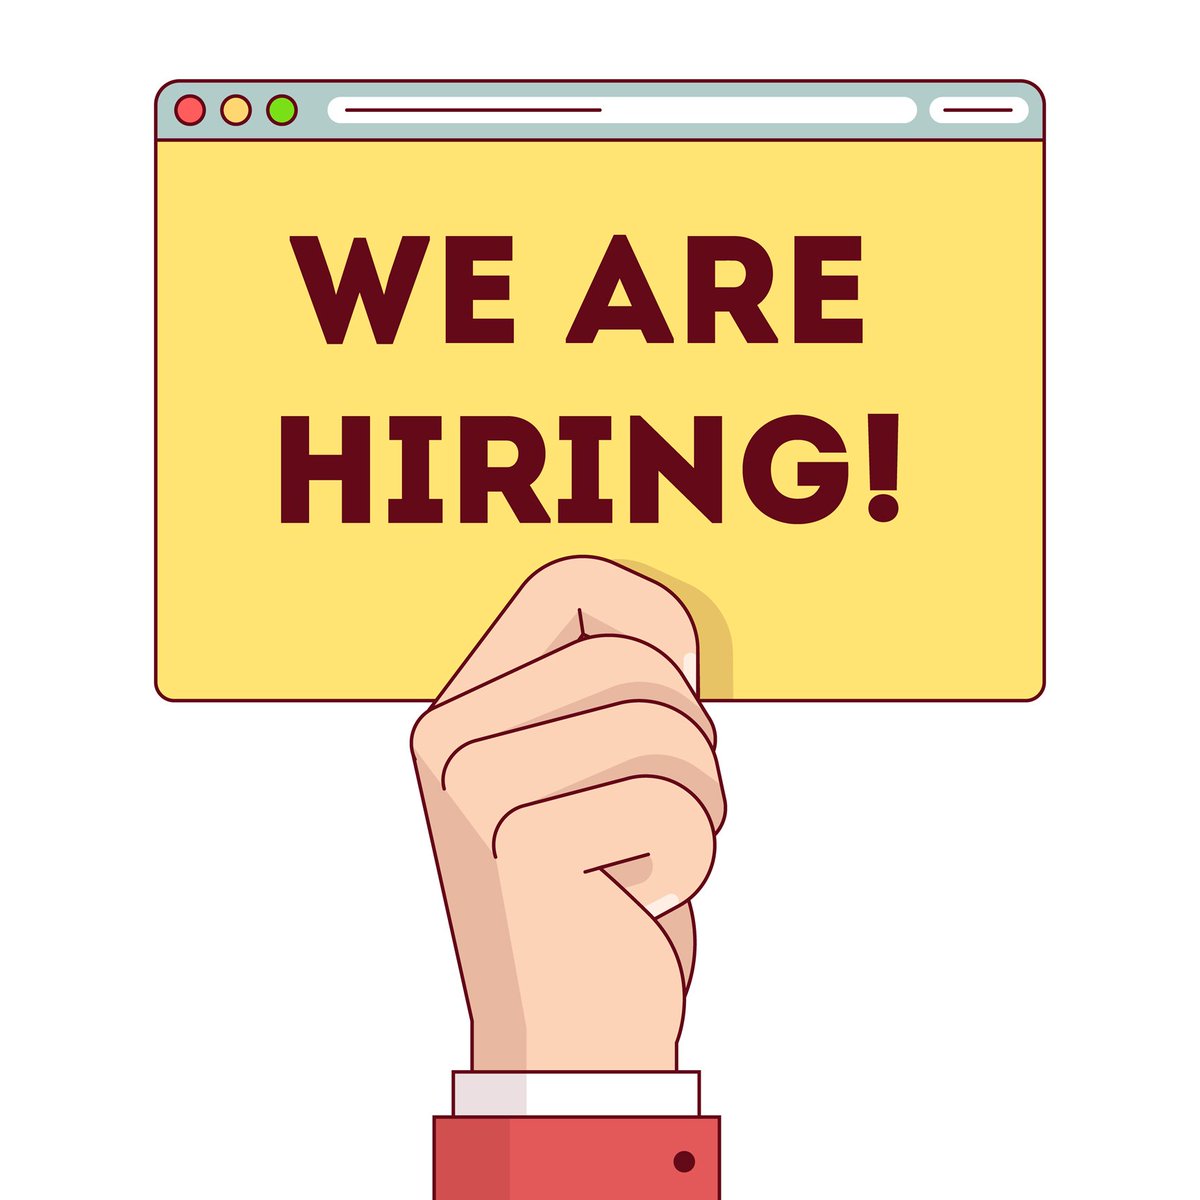 📢WE ARE HIRING! 

would you like to be a part of our #terais team? we have an open postdoctoral position!  

For more information click on @EURAXESS here euraxess.ec.europa.eu/jobs/167468

#openjob #postdocposition #postdoc #jobsearch #horizonproject #Robotics #openpostdoc #AI